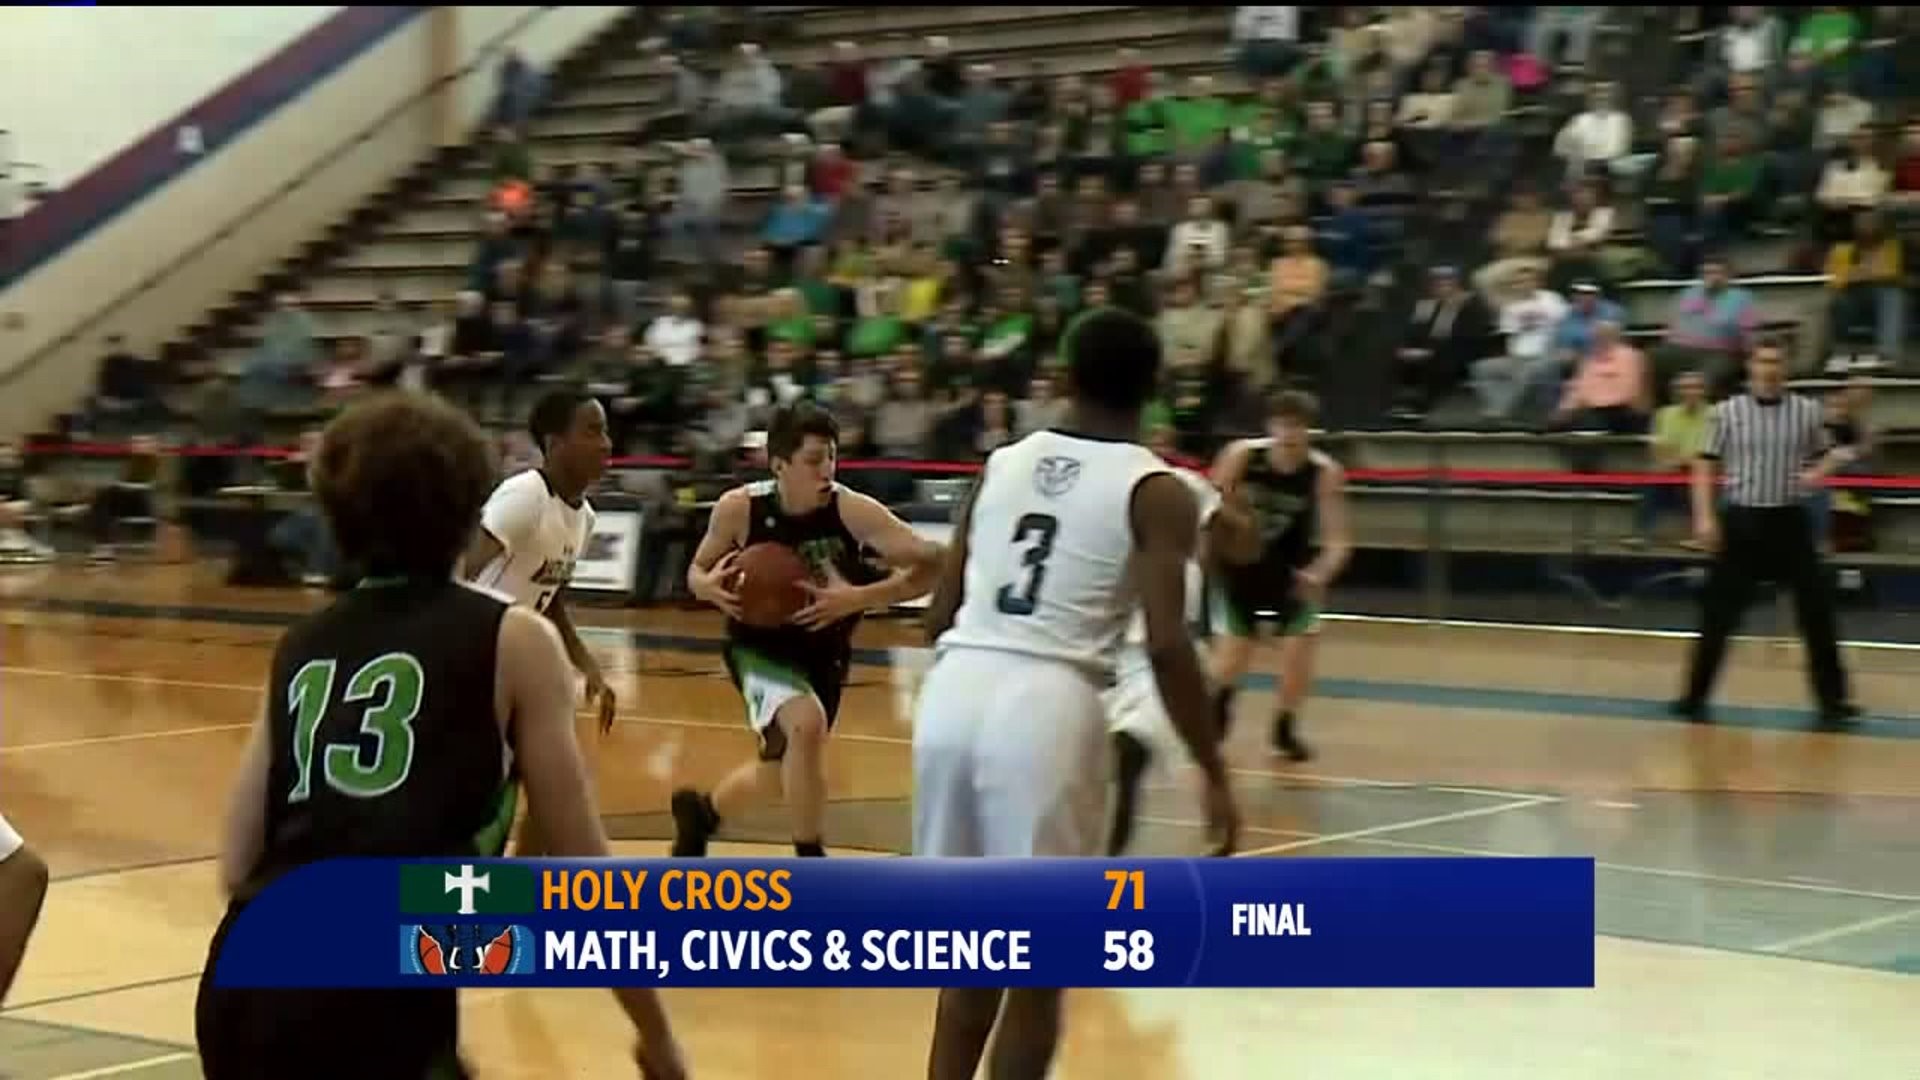 Holy Cross Upsets Math, Civics & Science 71-58 to Reach State Semifinals